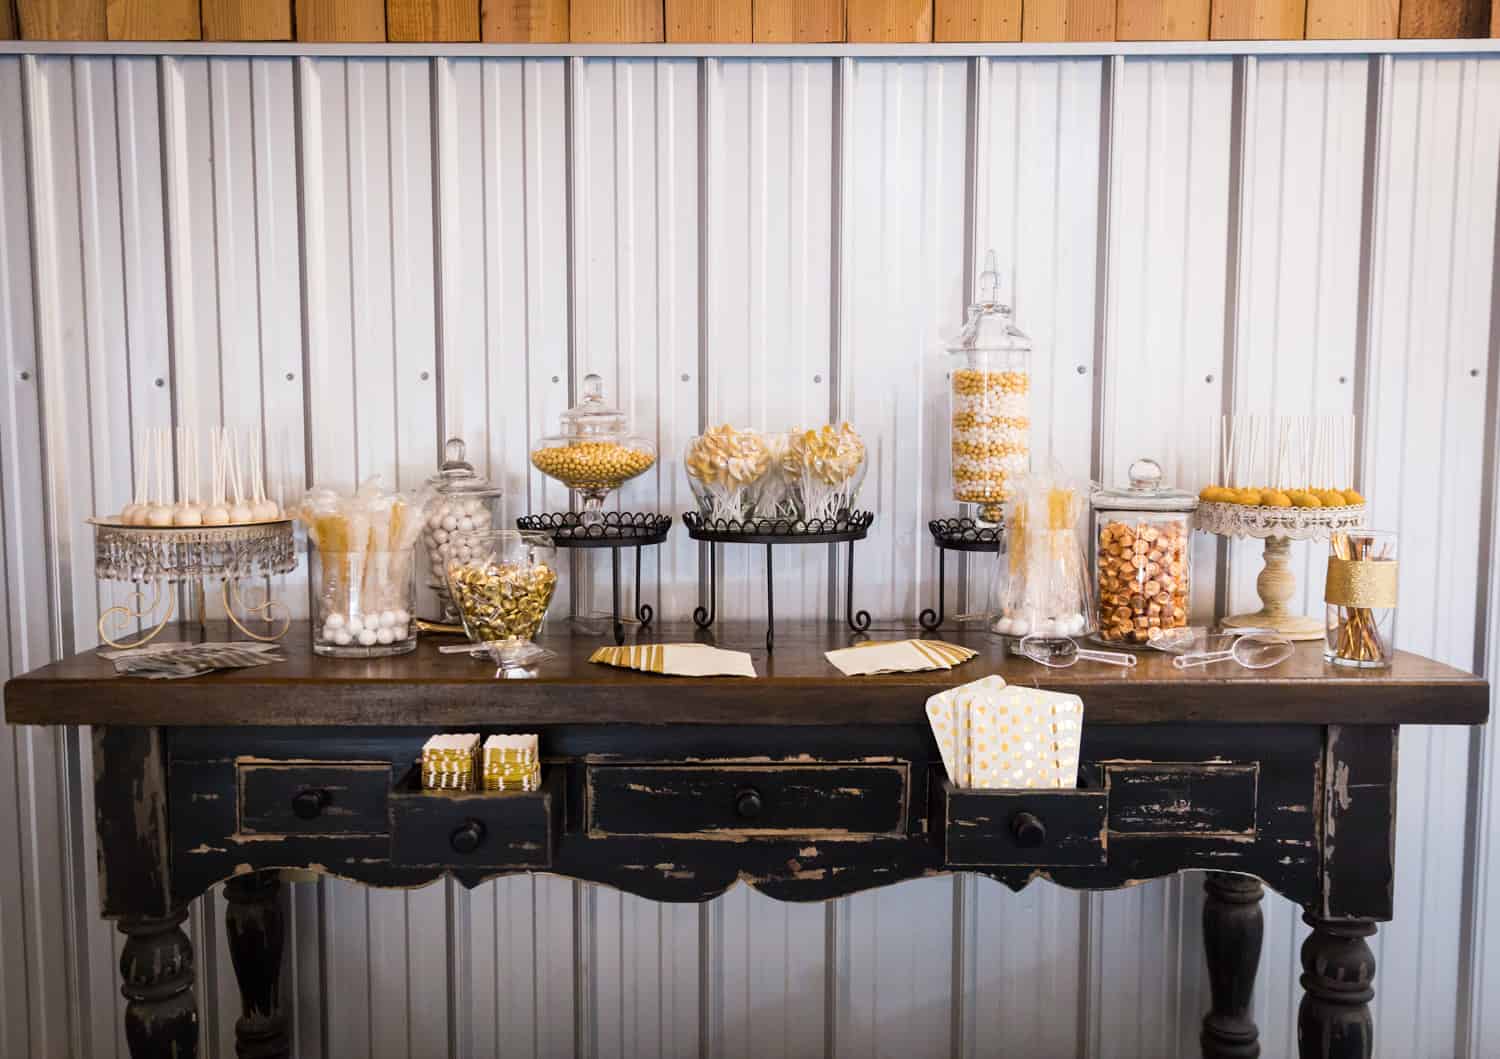 Candy buffet with gold-colored candies on table